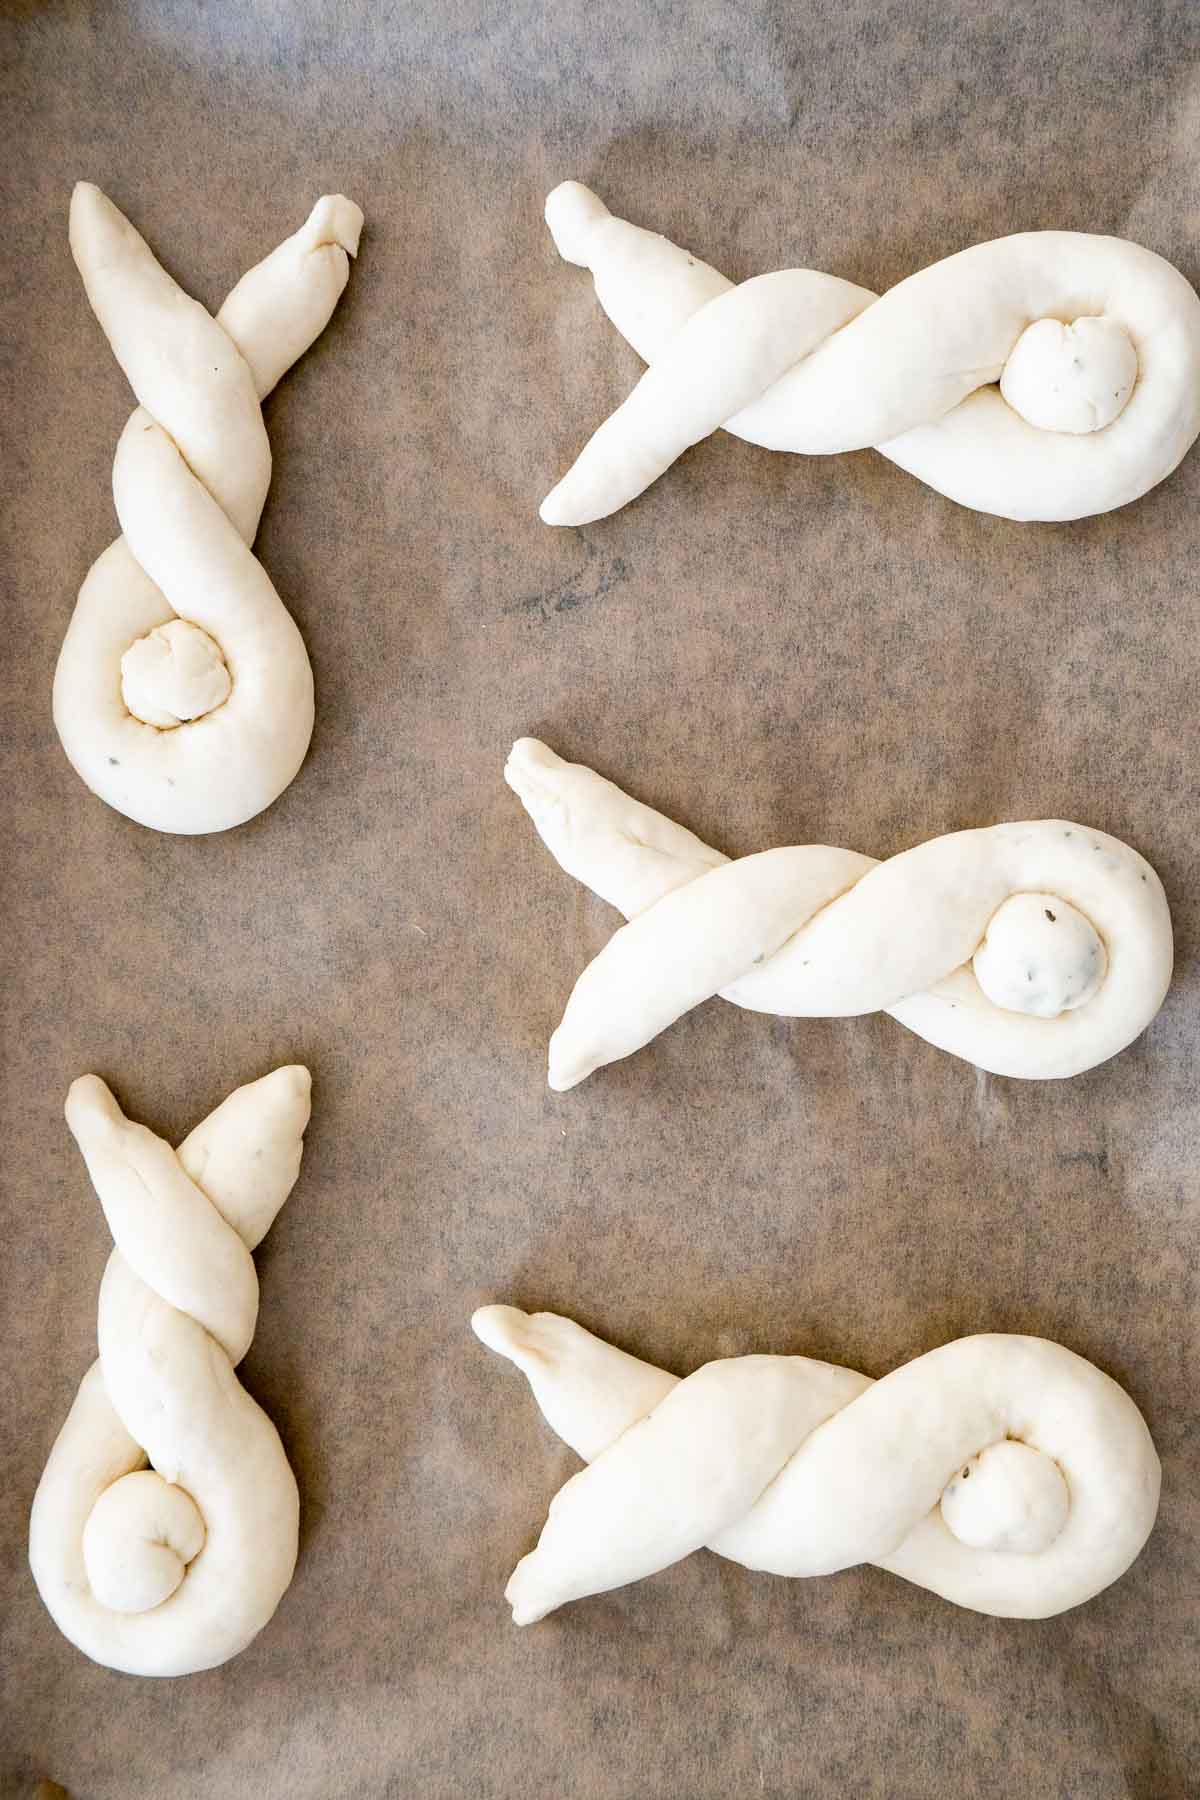 Shaped bunny rolls on parchment paper.